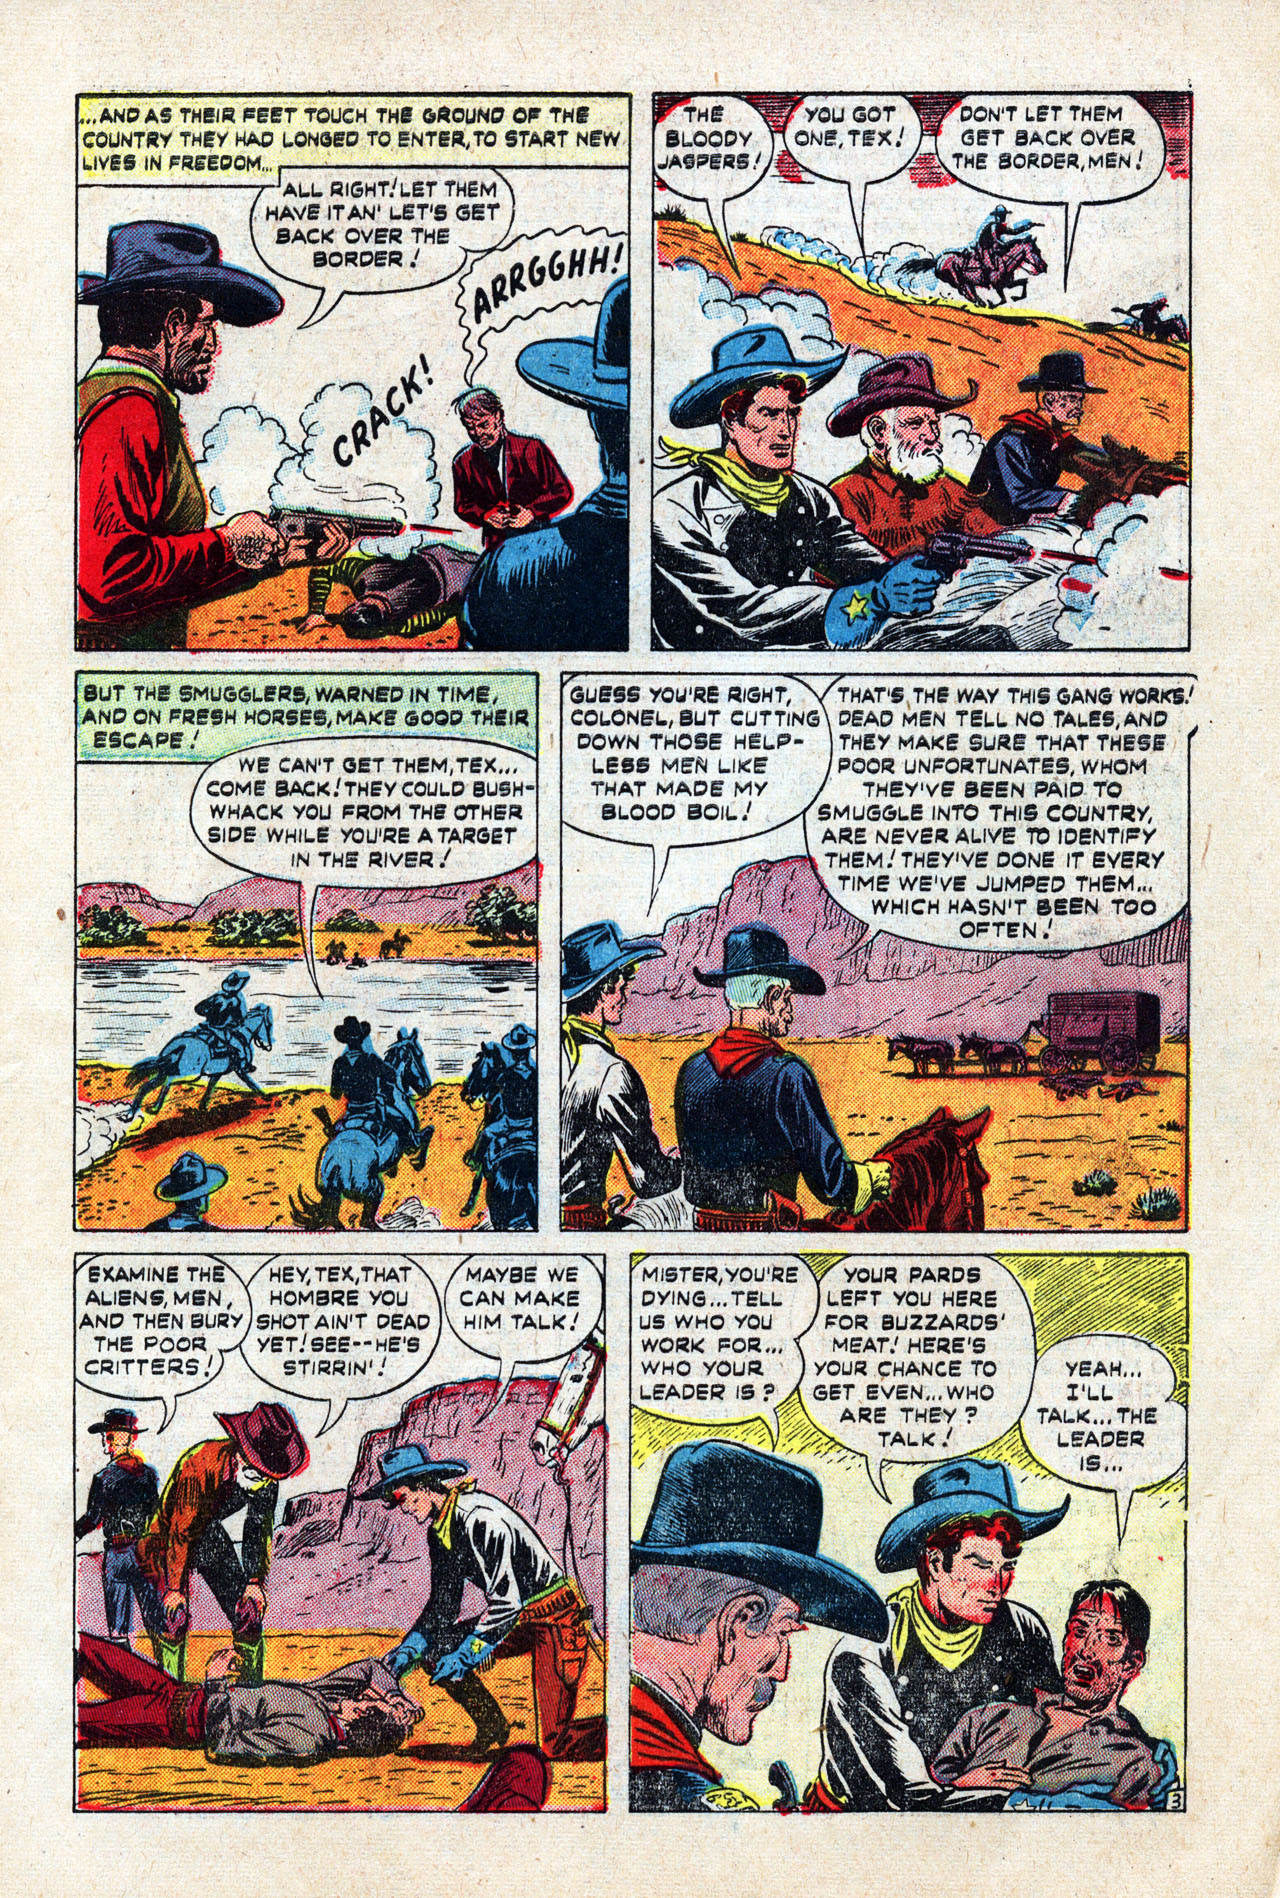 Read online Tex Taylor comic -  Issue #9 - 5